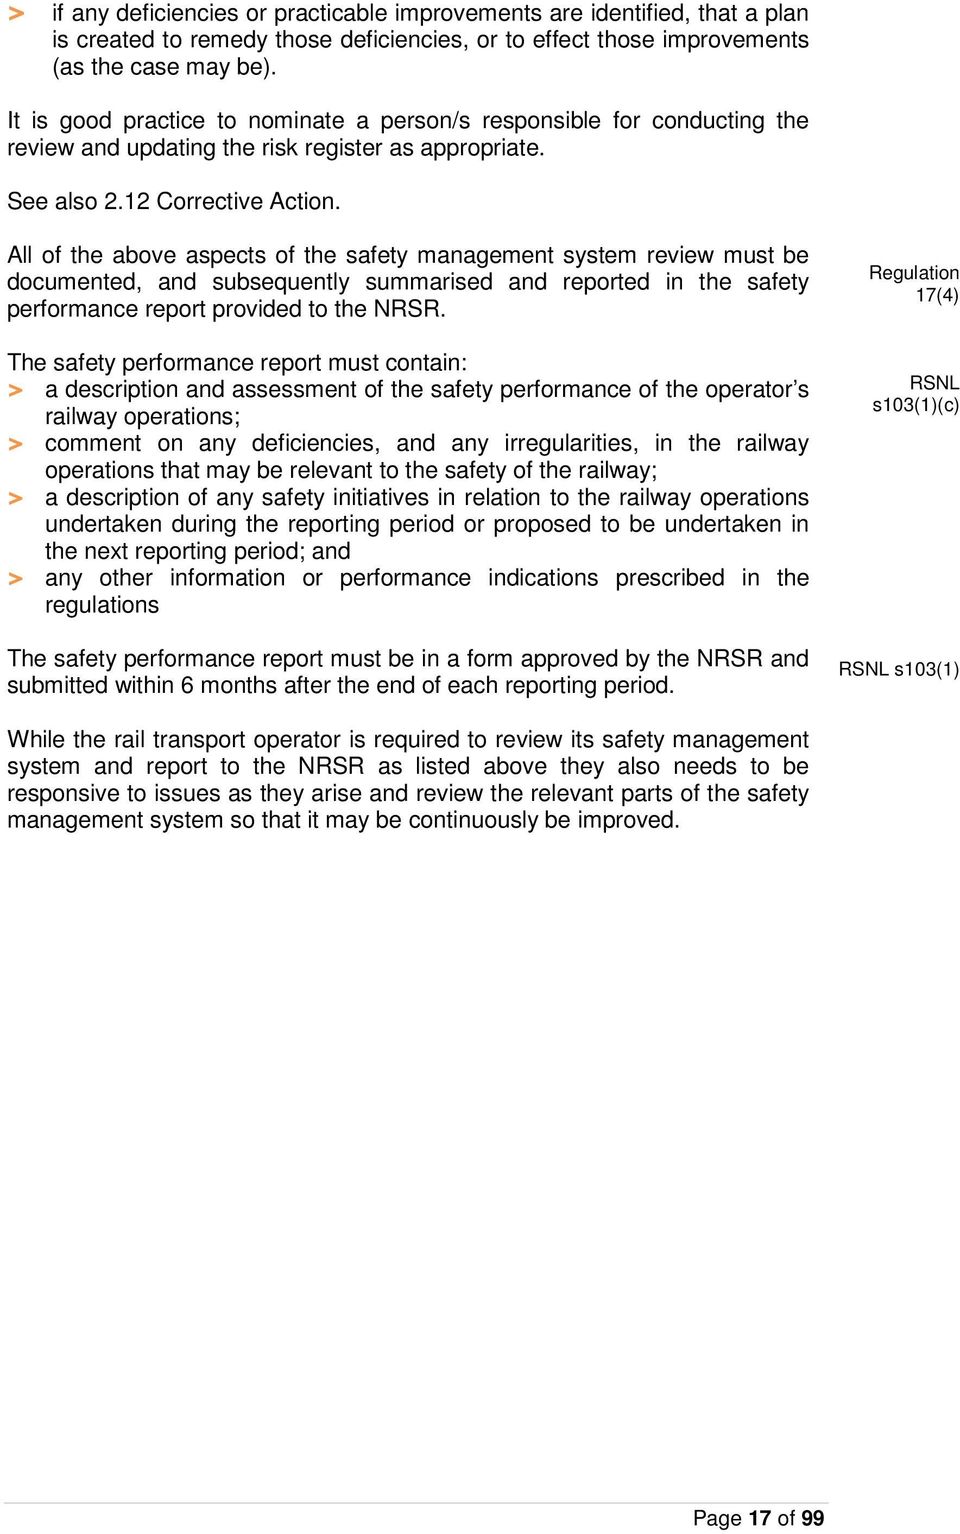 All of the above aspects of the safety management system review must be documented, and subsequently summarised and reported in the safety performance report provided to the NRSR.